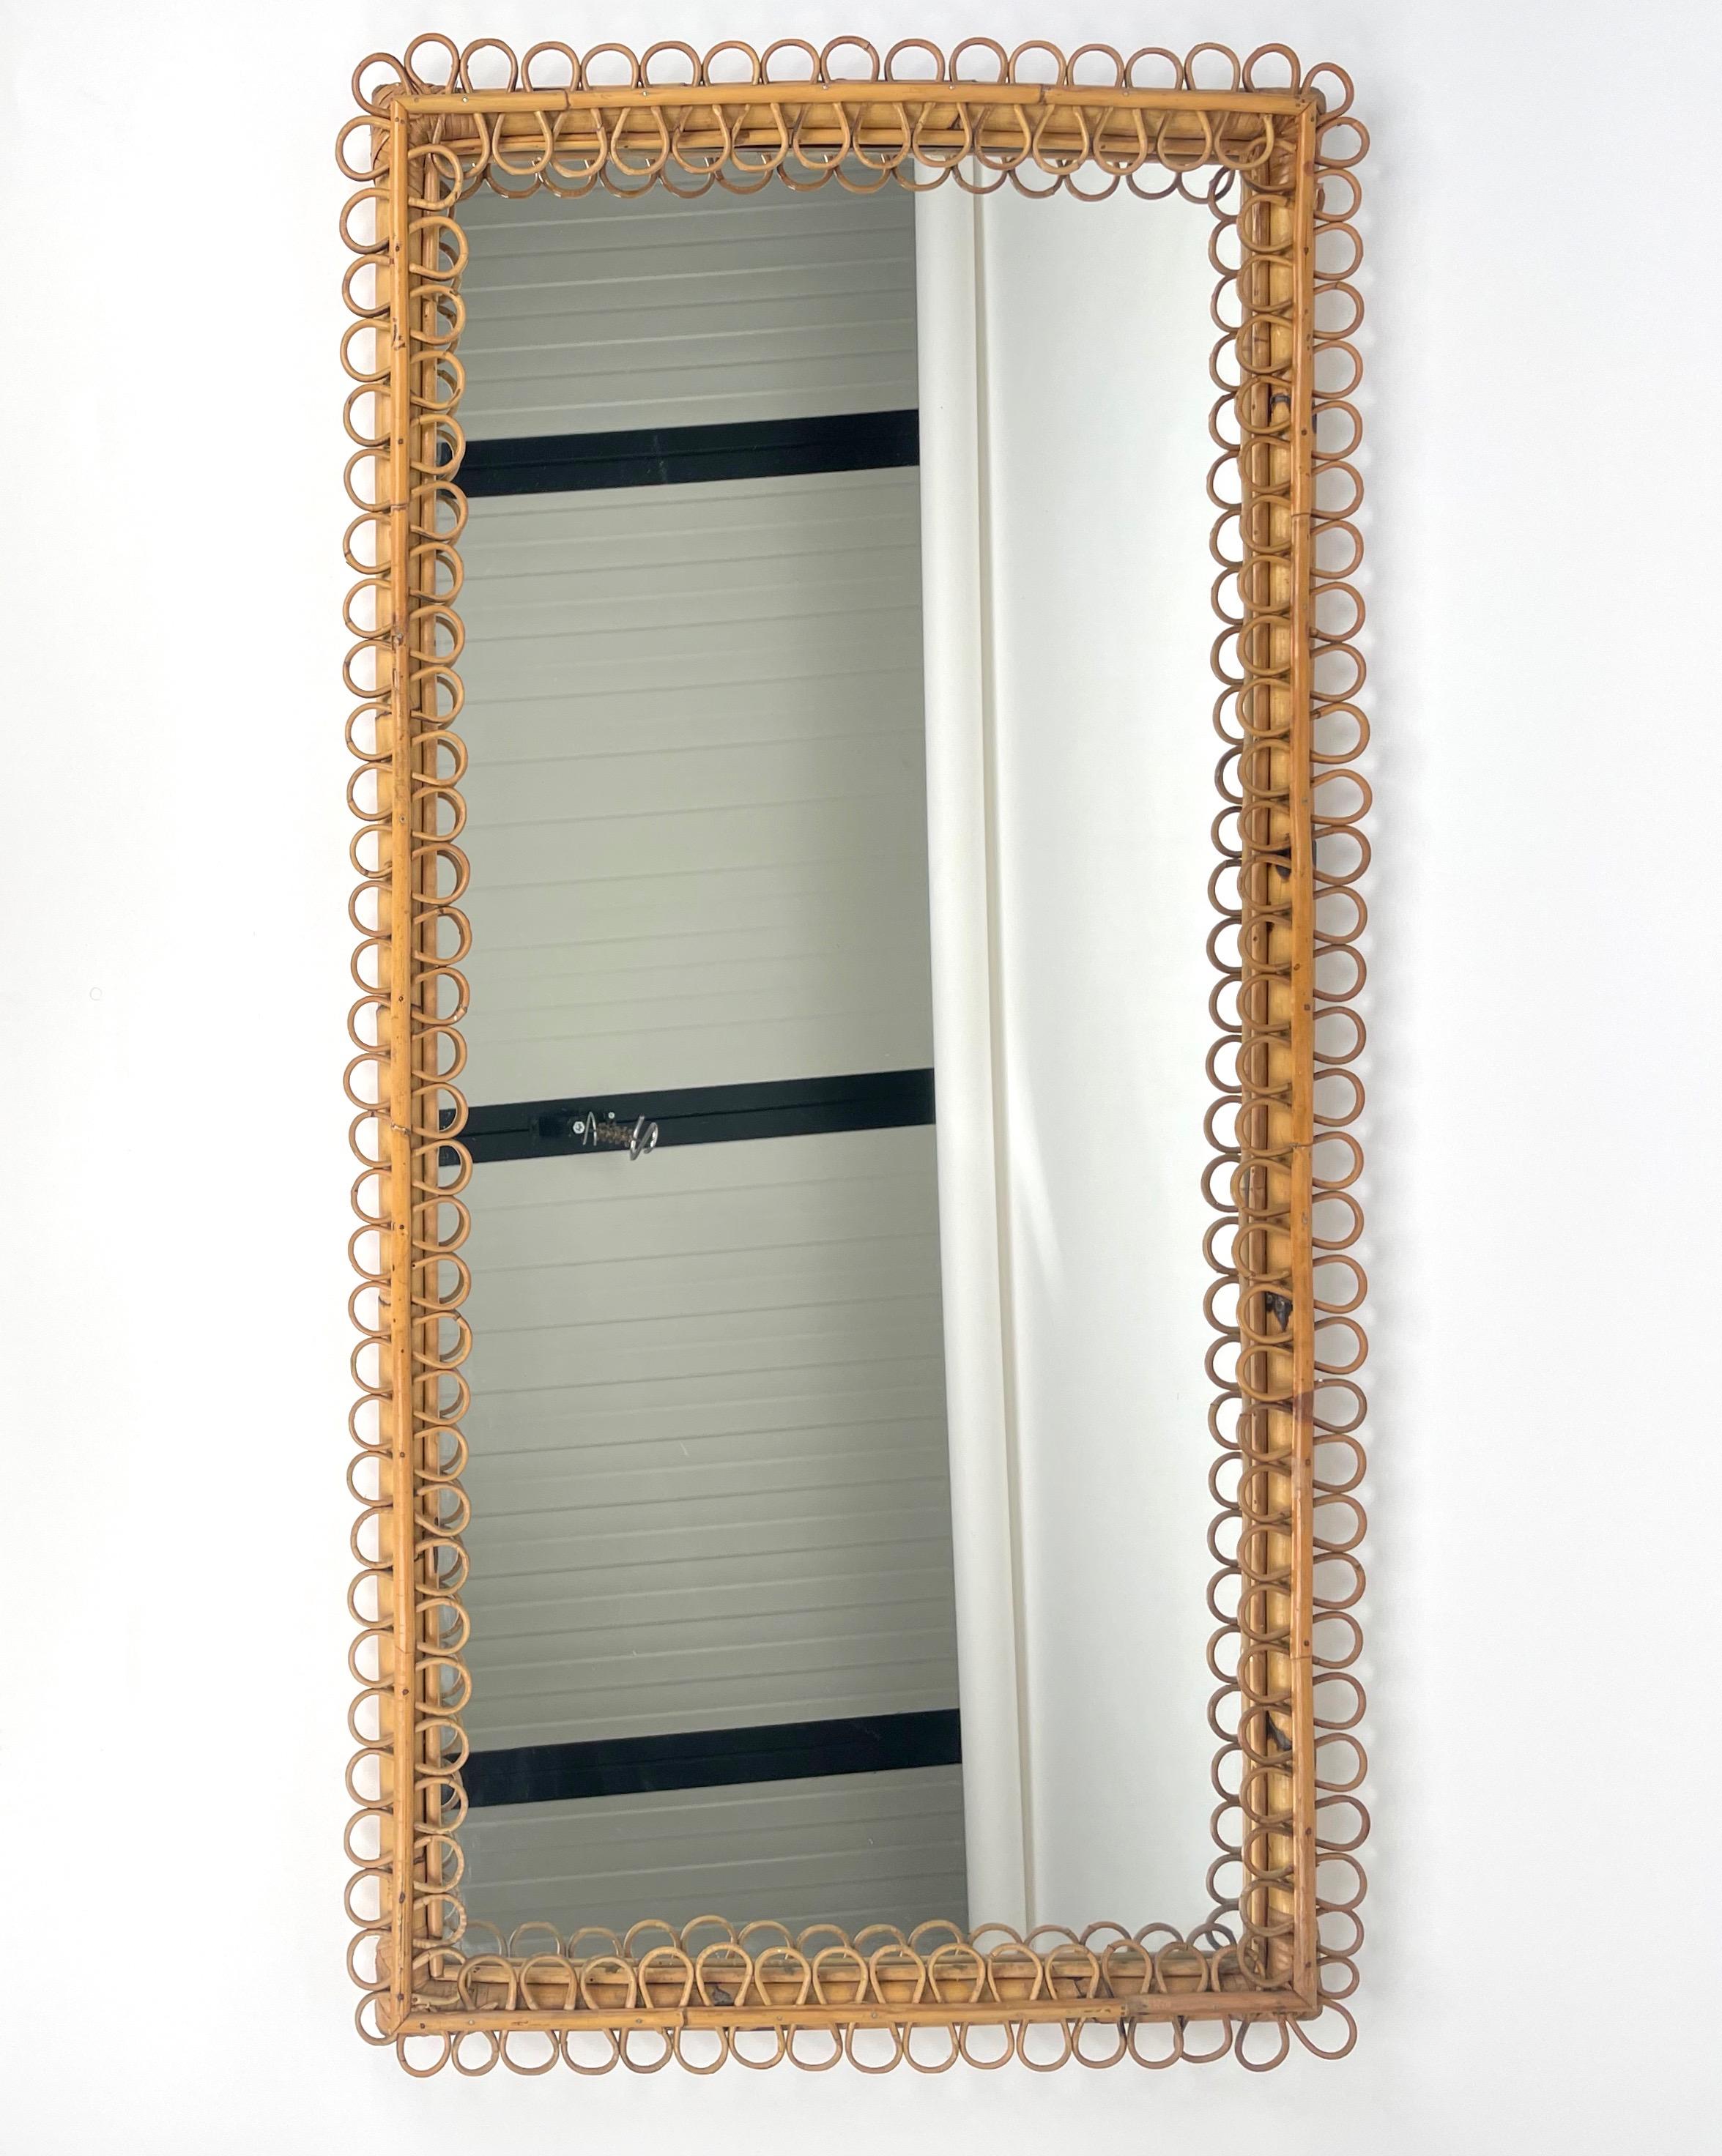 Rare and large rectangular wall mirror in a bamboo frame adorned by rattan curlicues. 

Made in Italy in the 1960s.